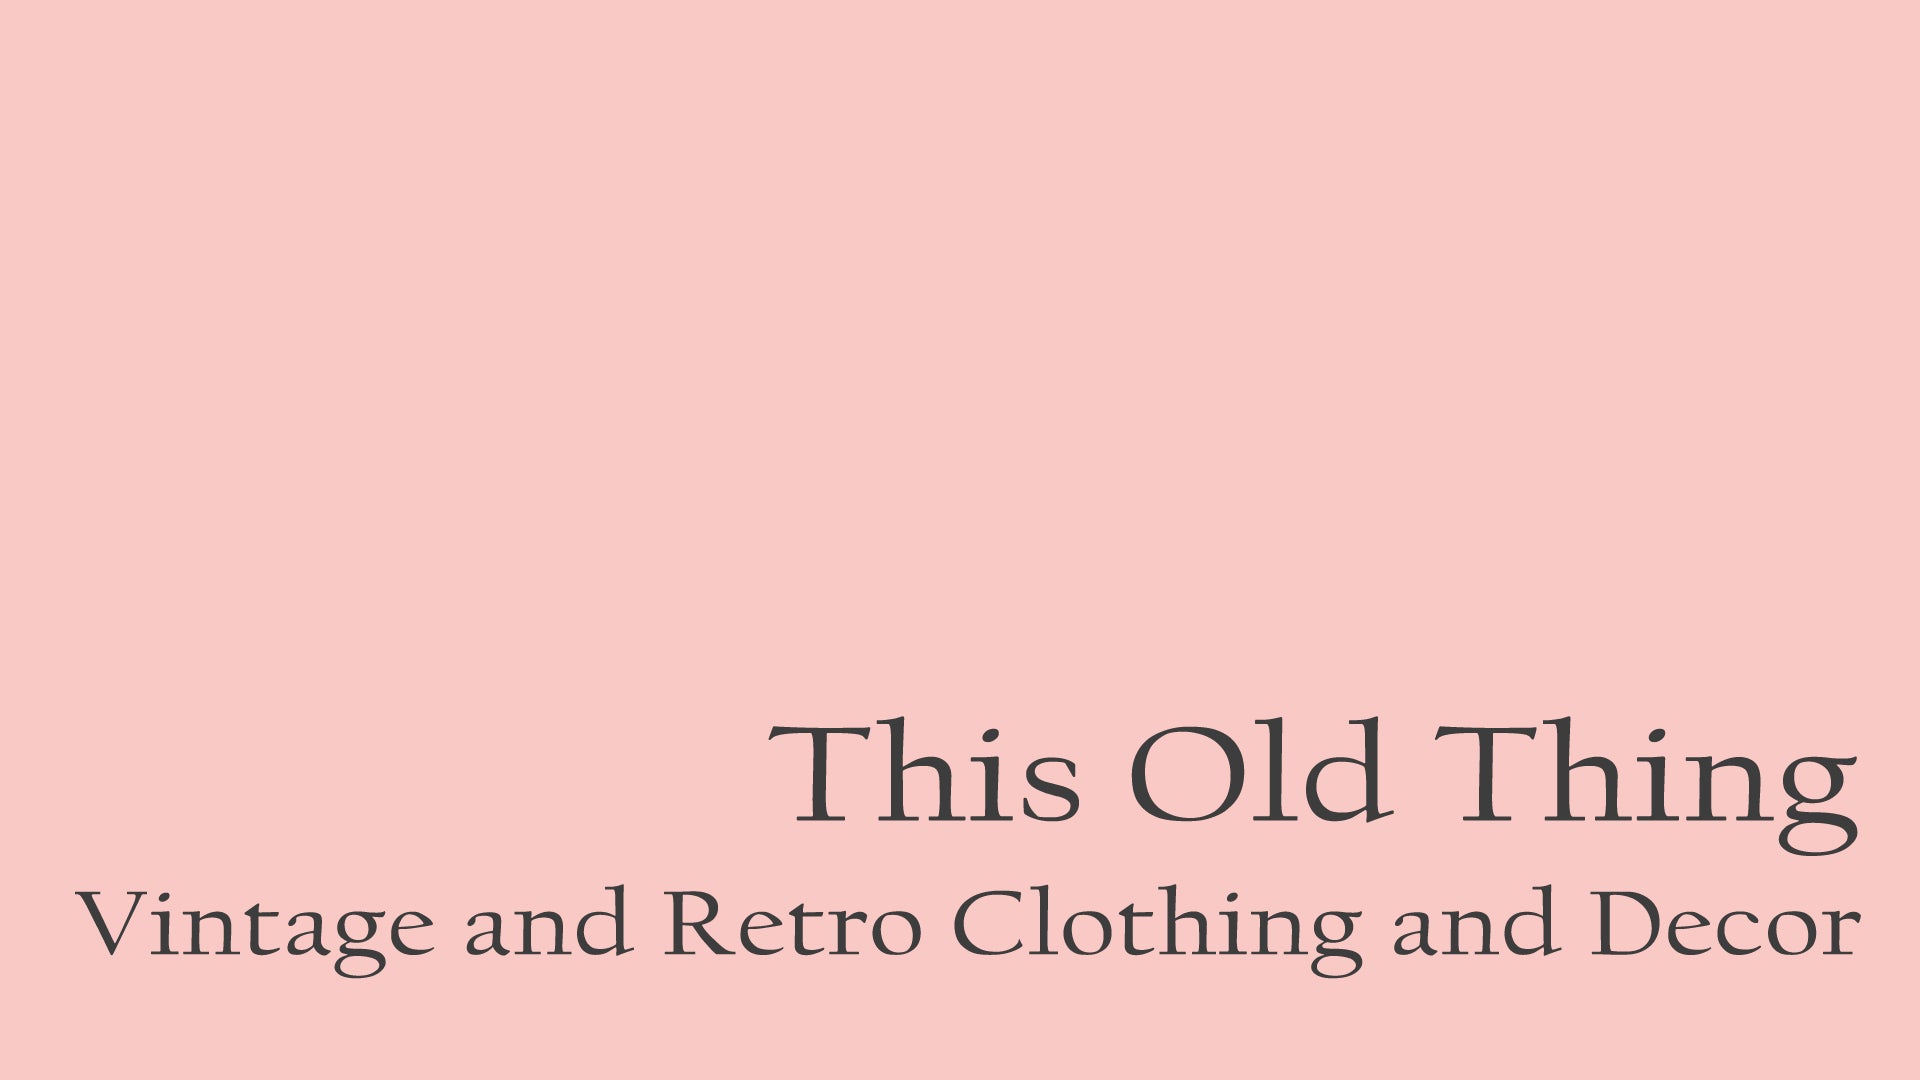 This Old Thing Vintage Clothing and Decor